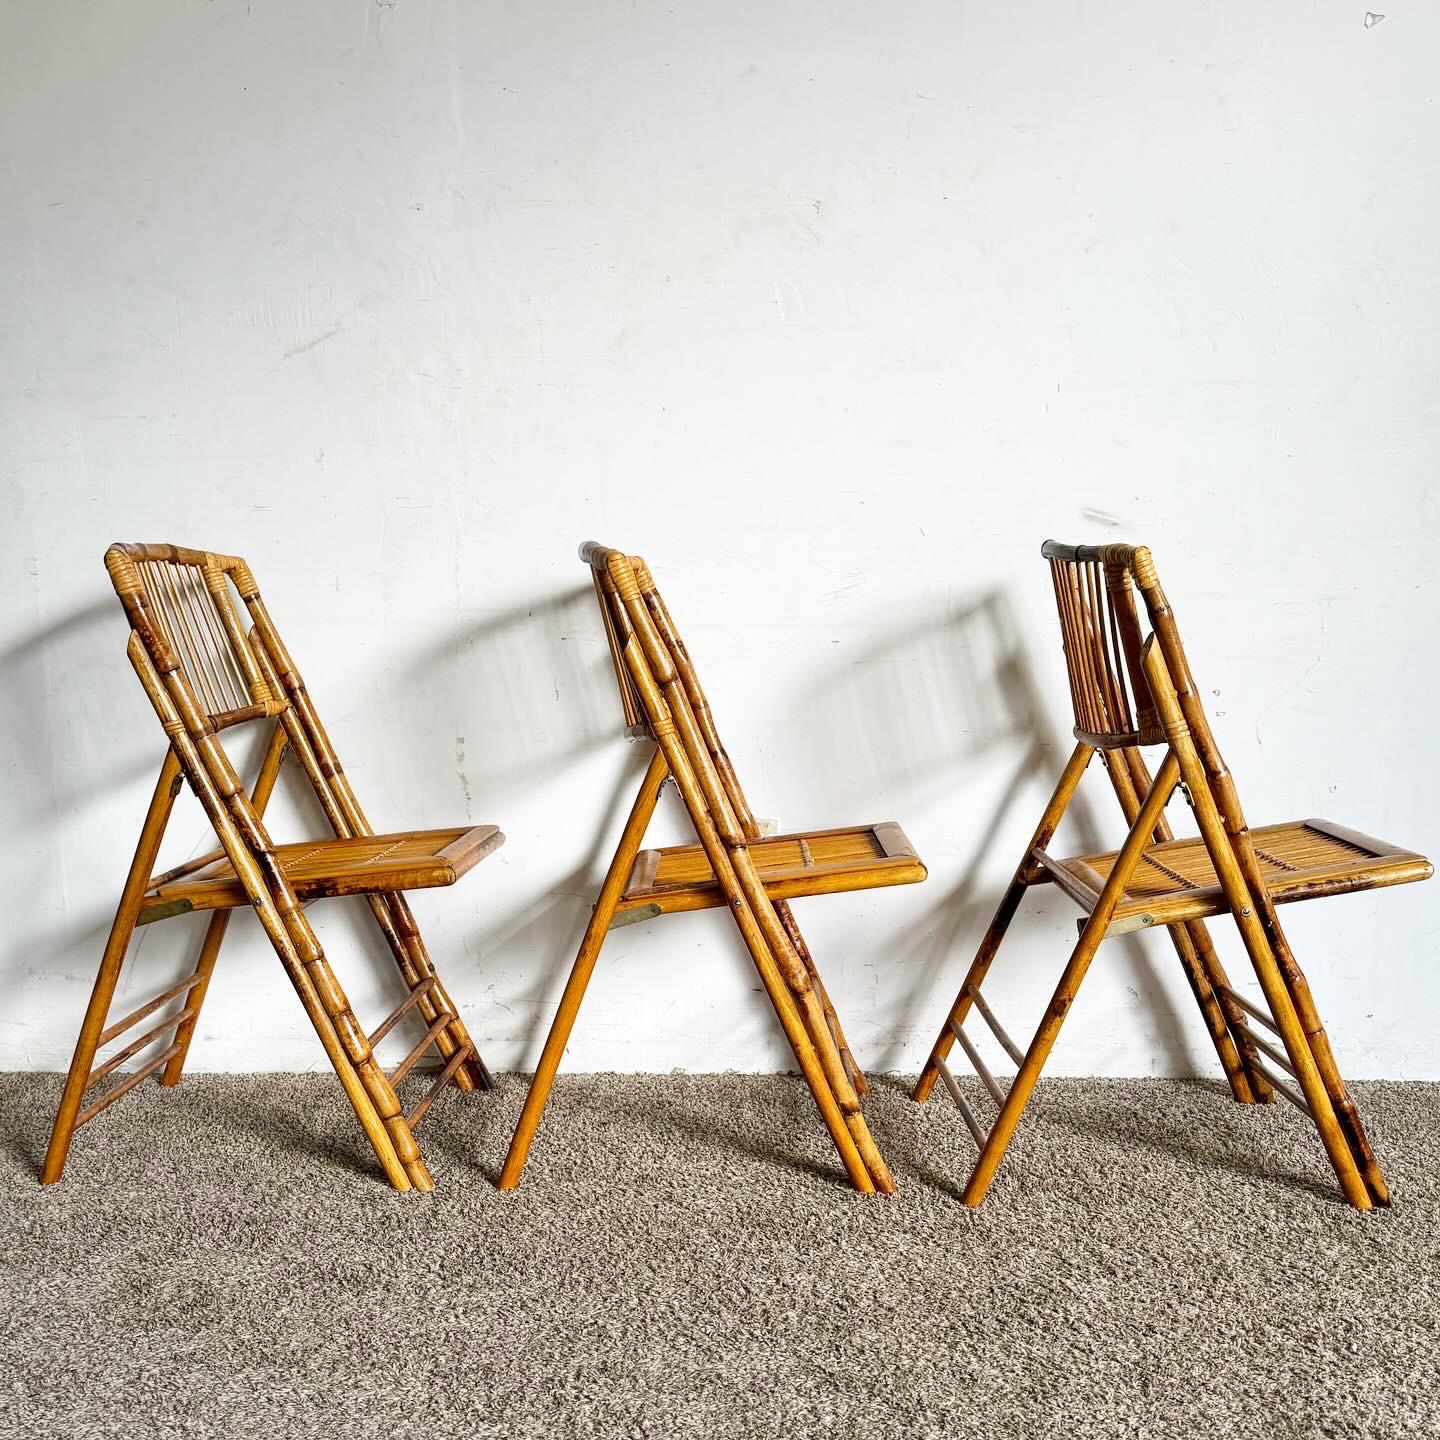 20th Century Boho Chic Tortoise Shell Bamboo Rattan Fold-Up Dining Chairs - Set of 3 For Sale